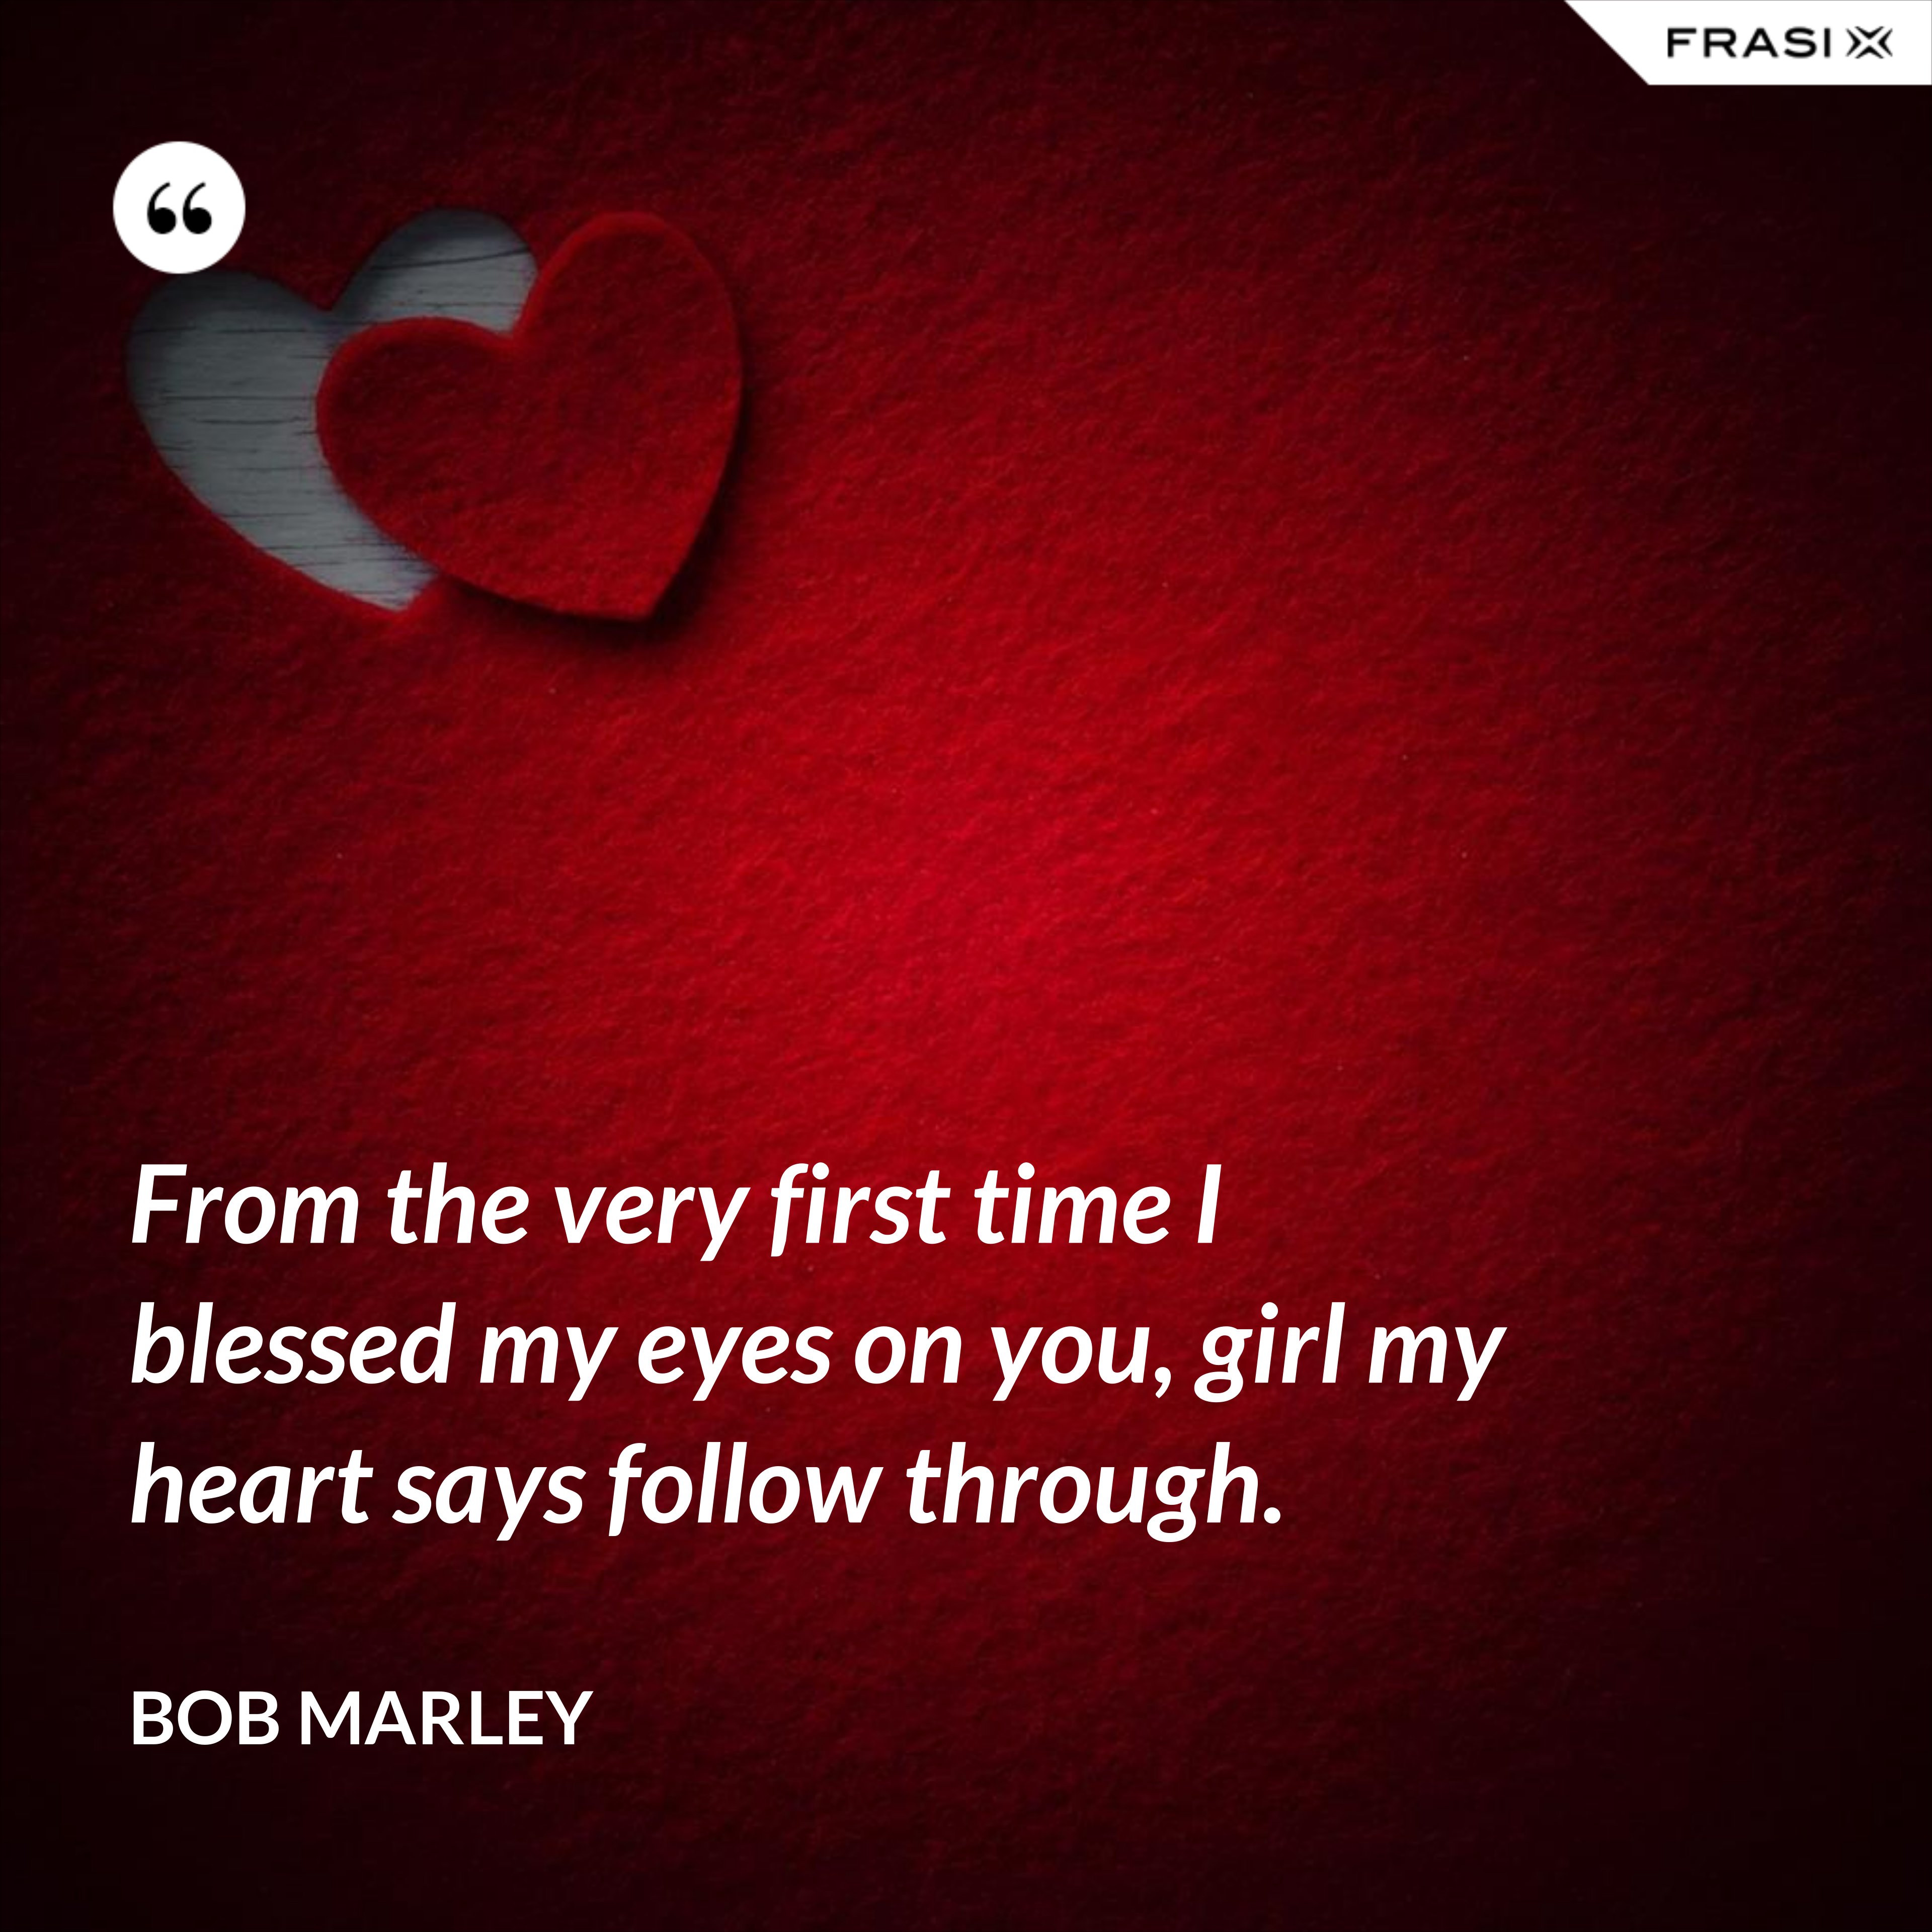 From the very first time I blessed my eyes on you, girl my heart says follow through. - Bob Marley